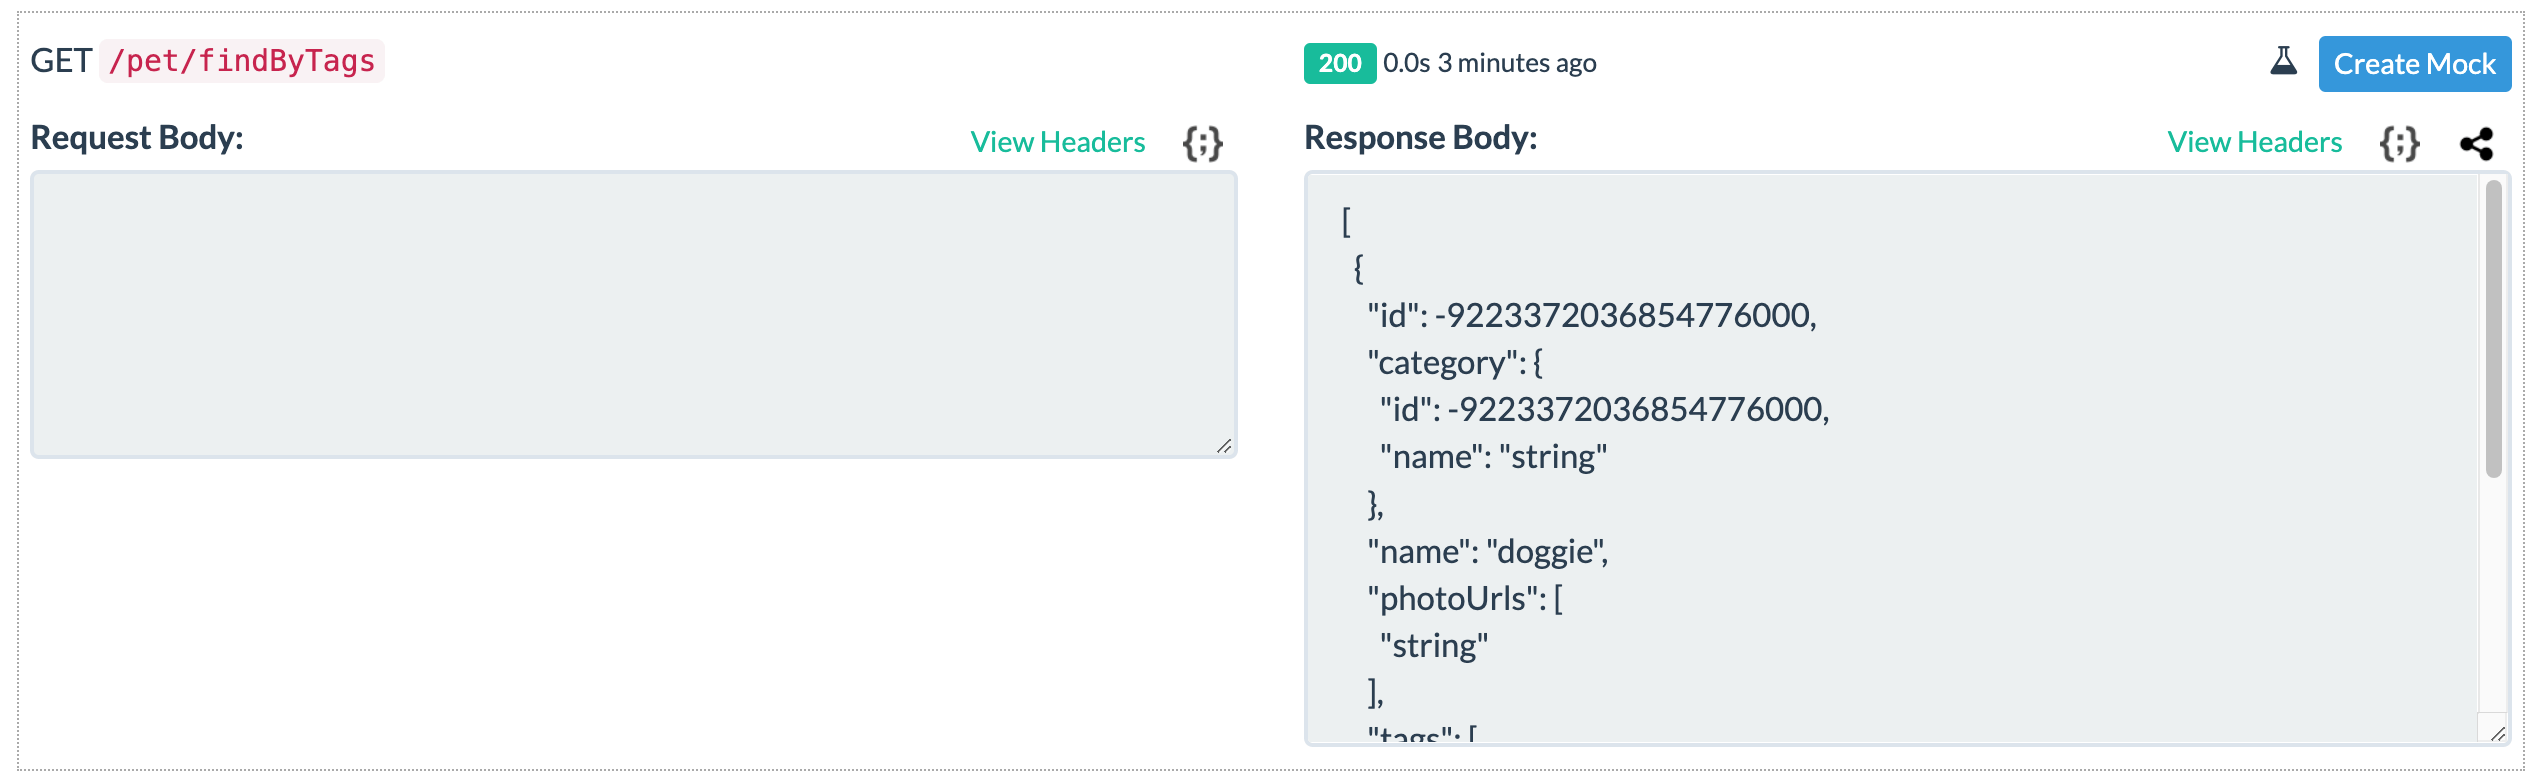 Beeceptor response for FindByTags